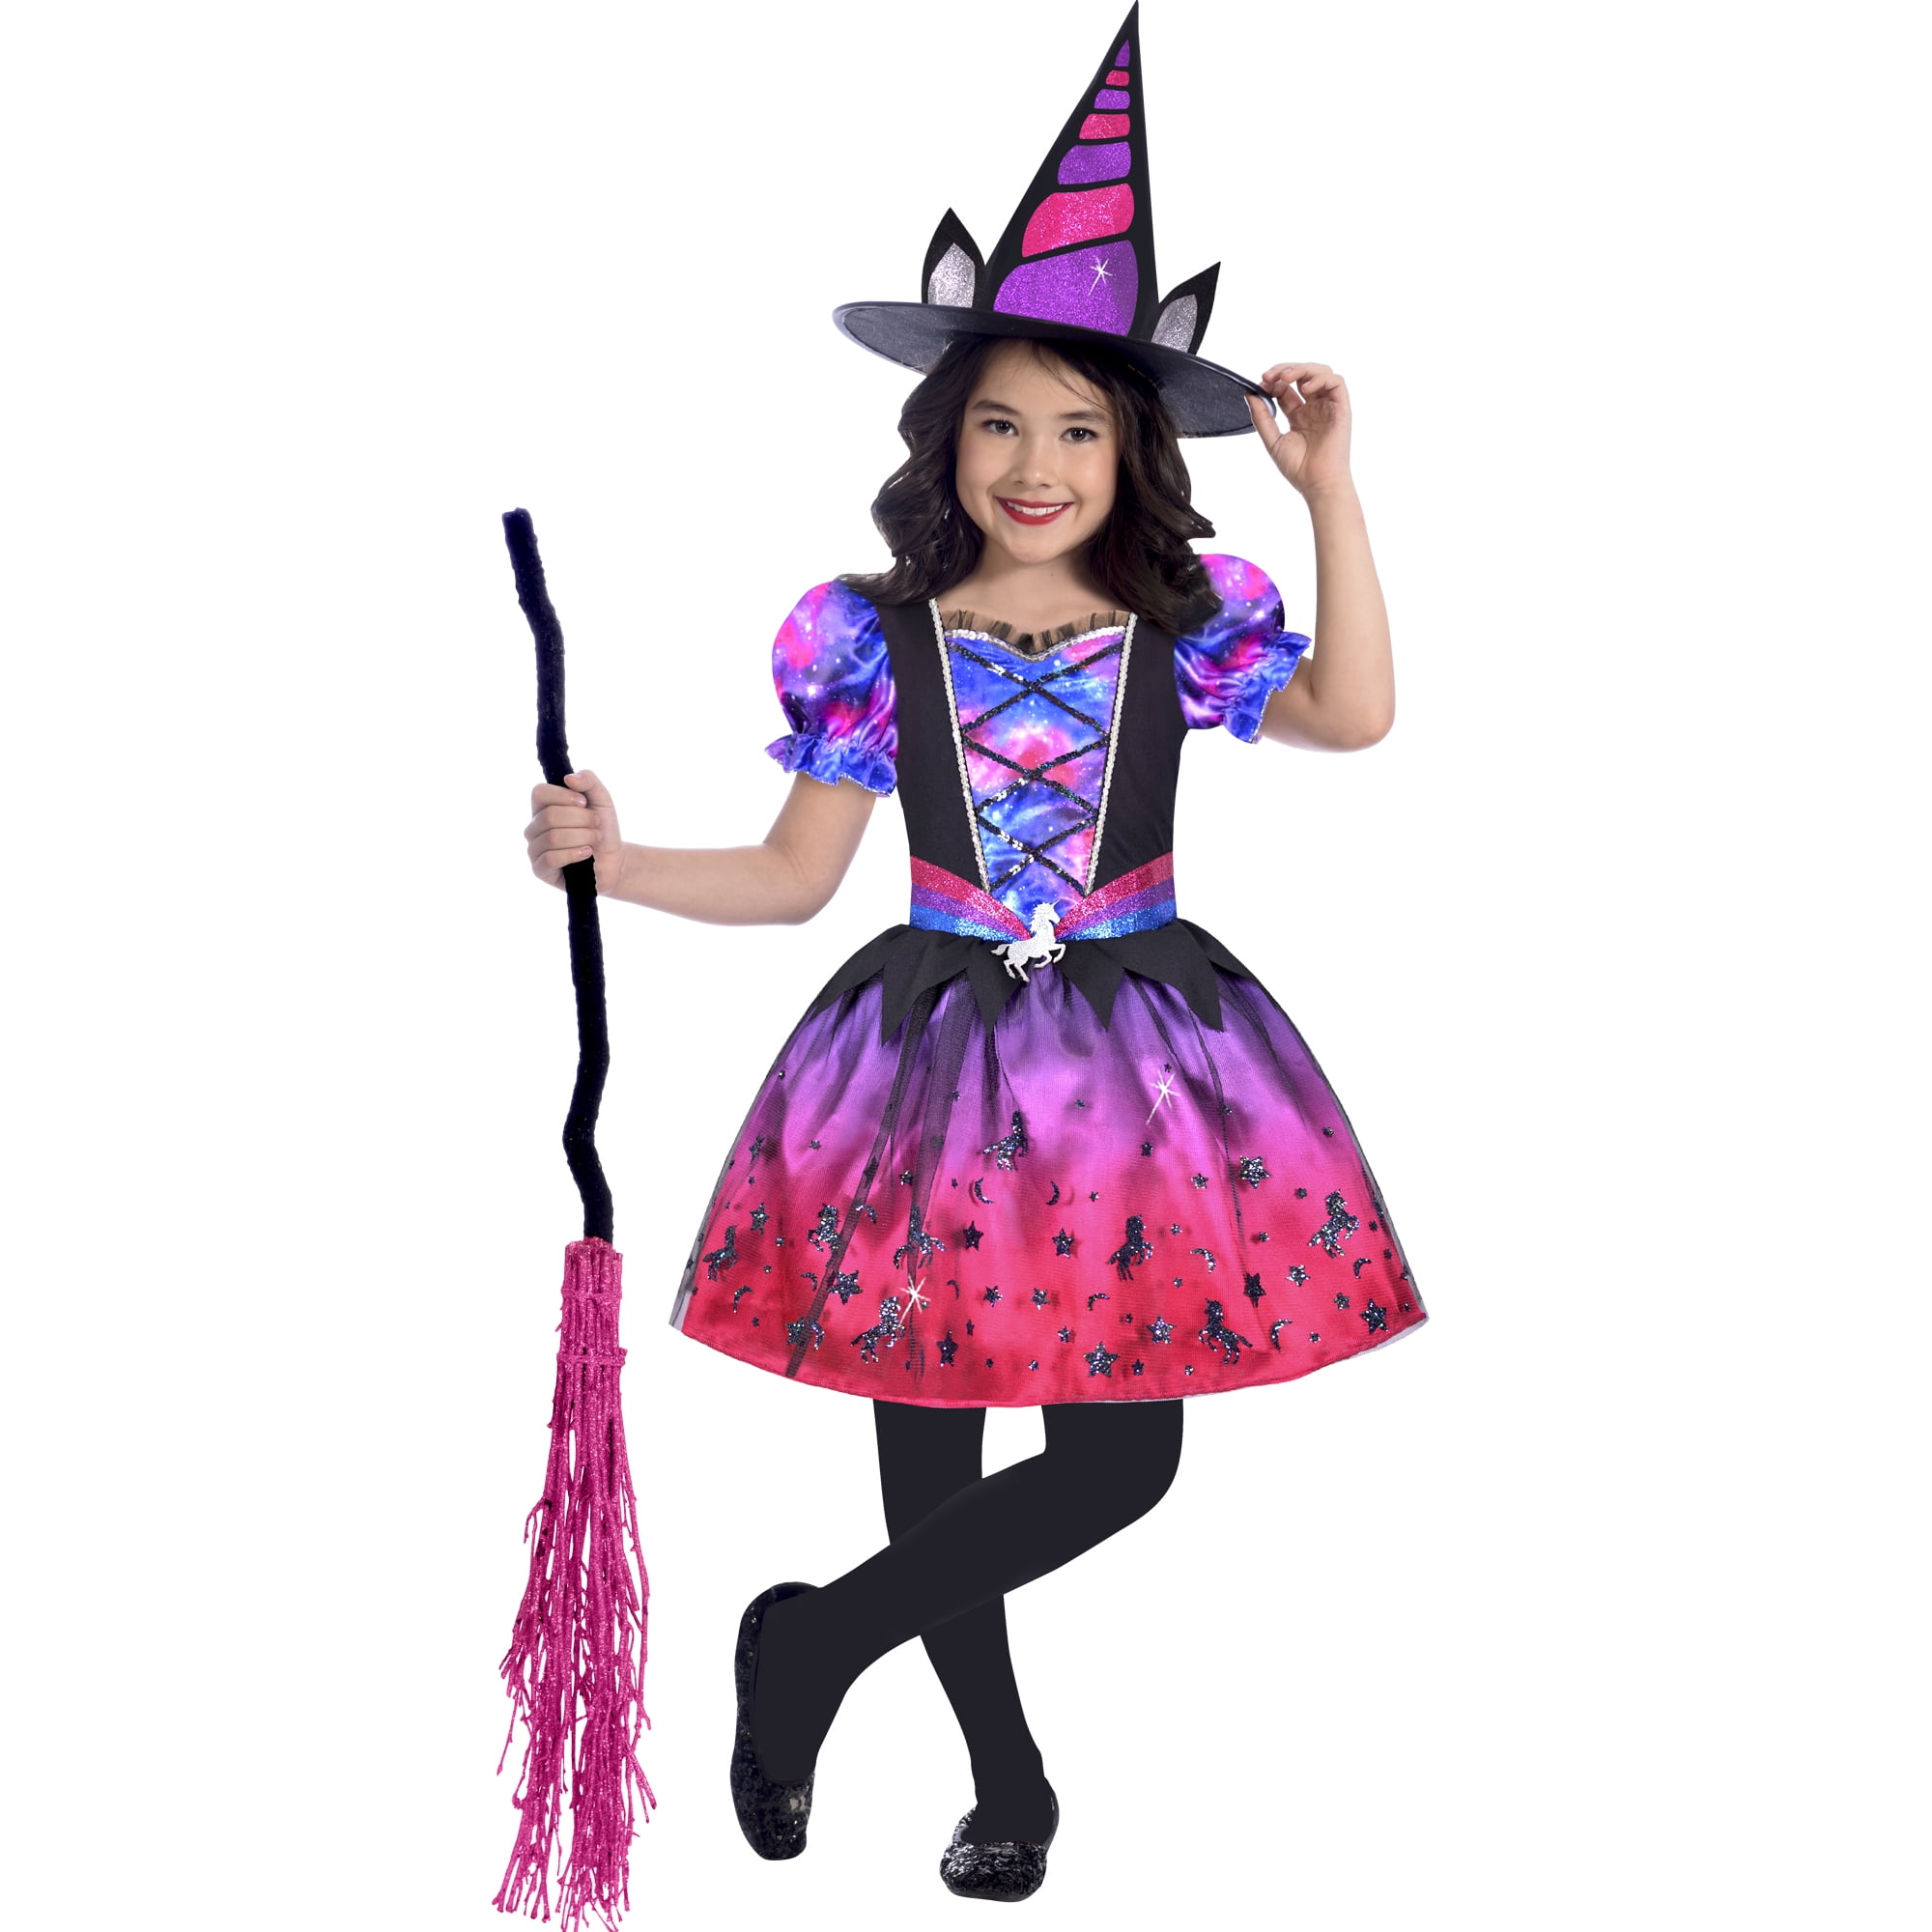 Girls Tutu Witch Costume+Hat Wicked Halloween Fancy Dress up Toddler Kids Outfit 